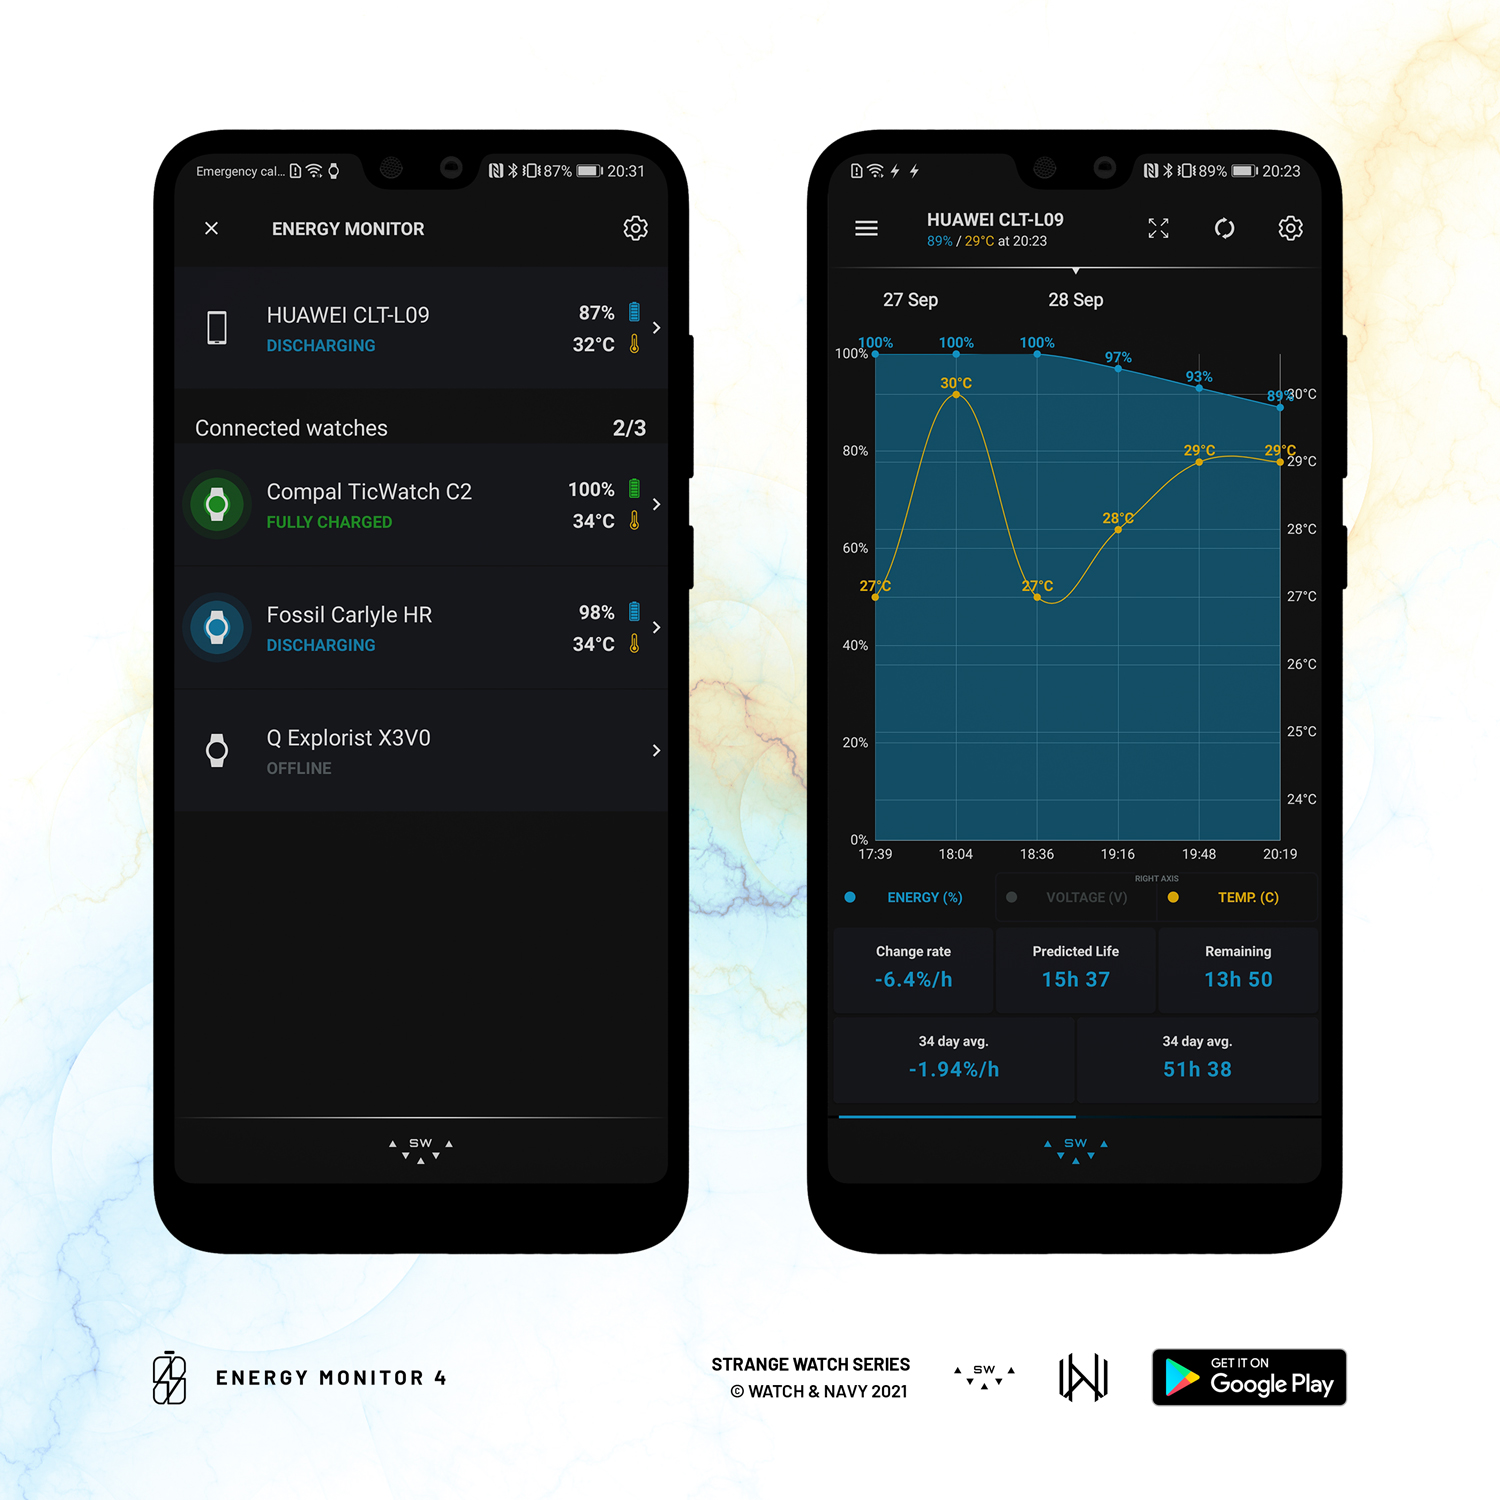 Energy Monitor 4, connected device list and chart dashboards on a smartphone